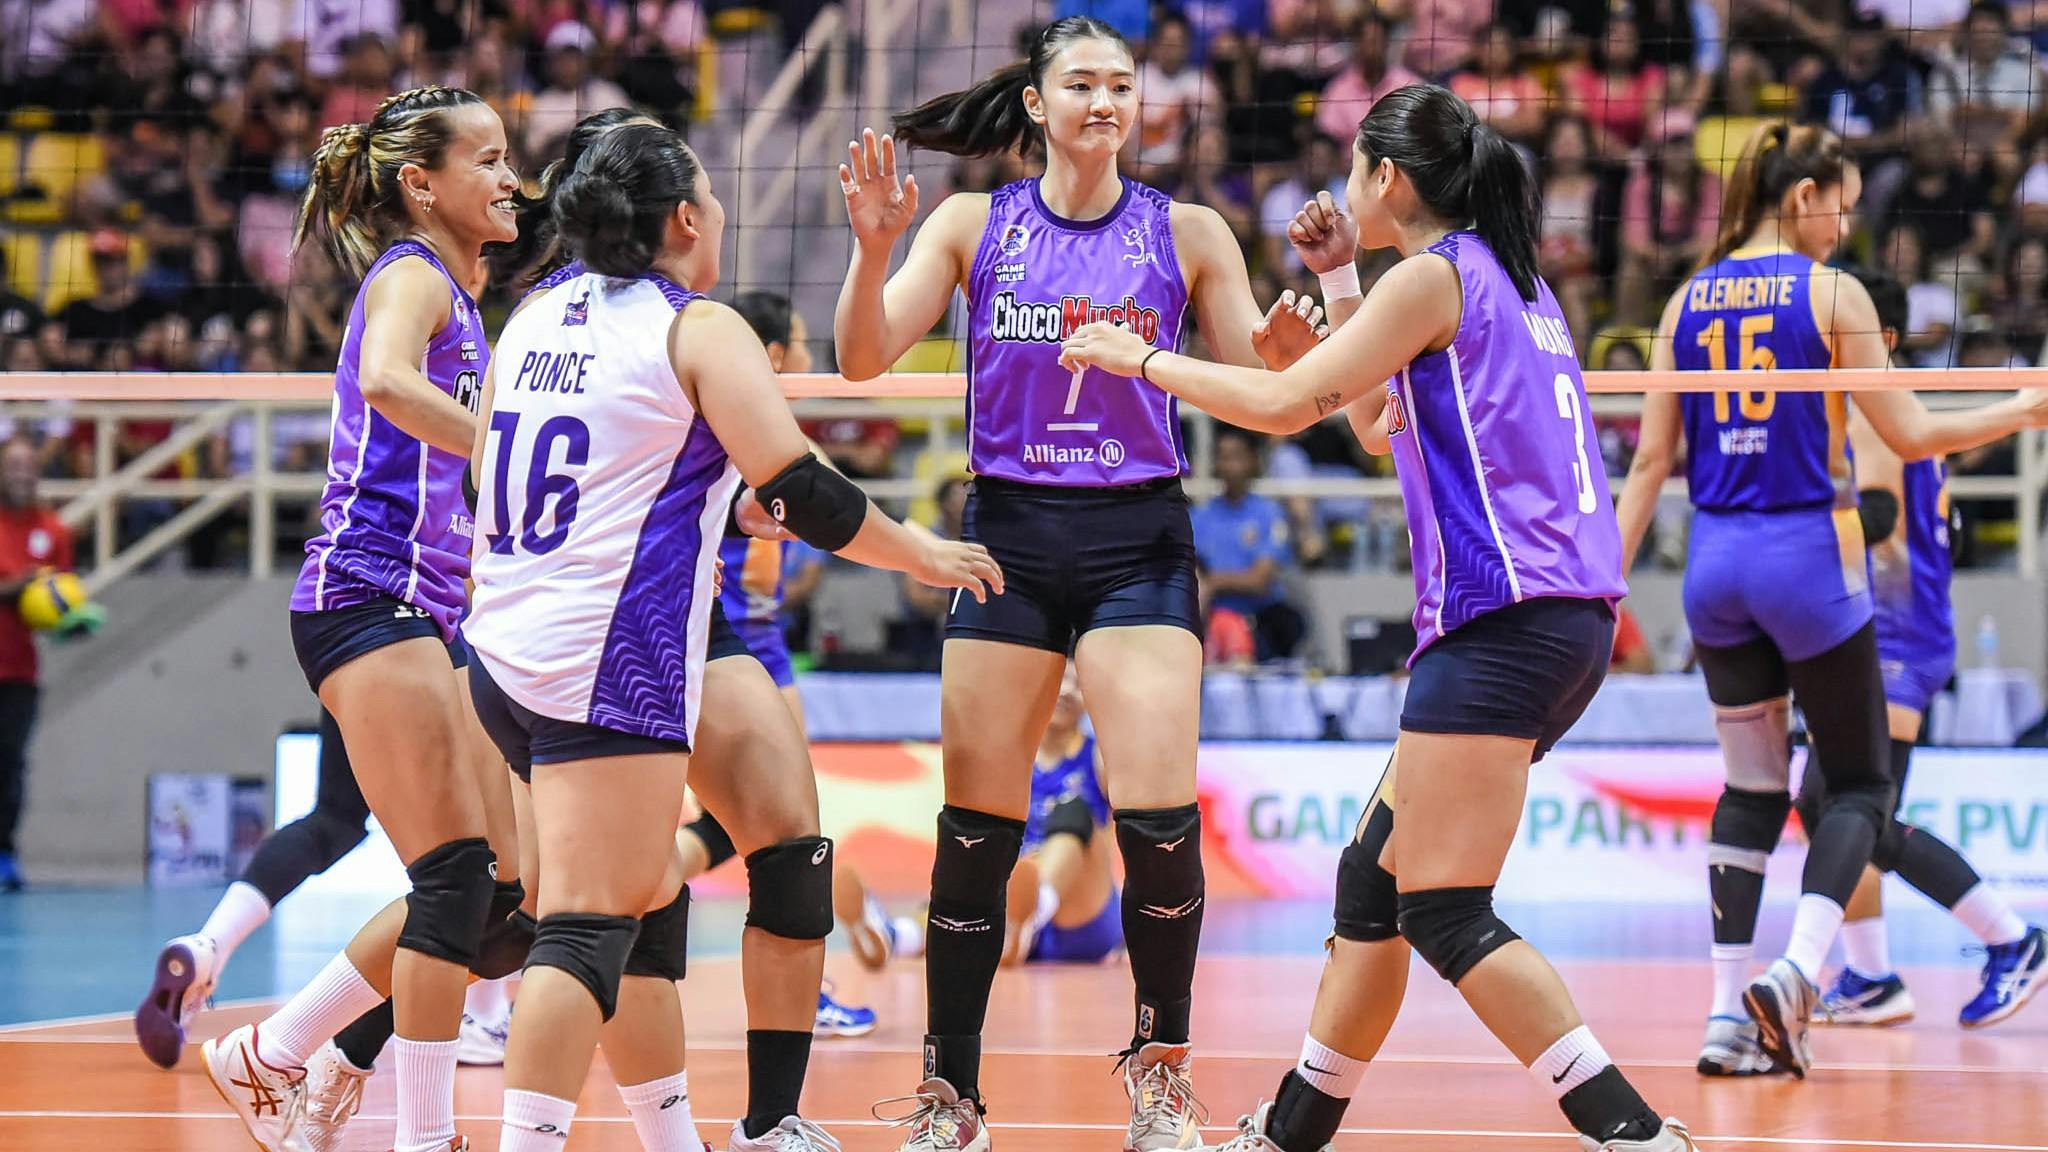 PVL: Solo Choco Mucho, unstoppable Brooke Van Sickle, all the stats in Week 7 of All-Filipino Conference